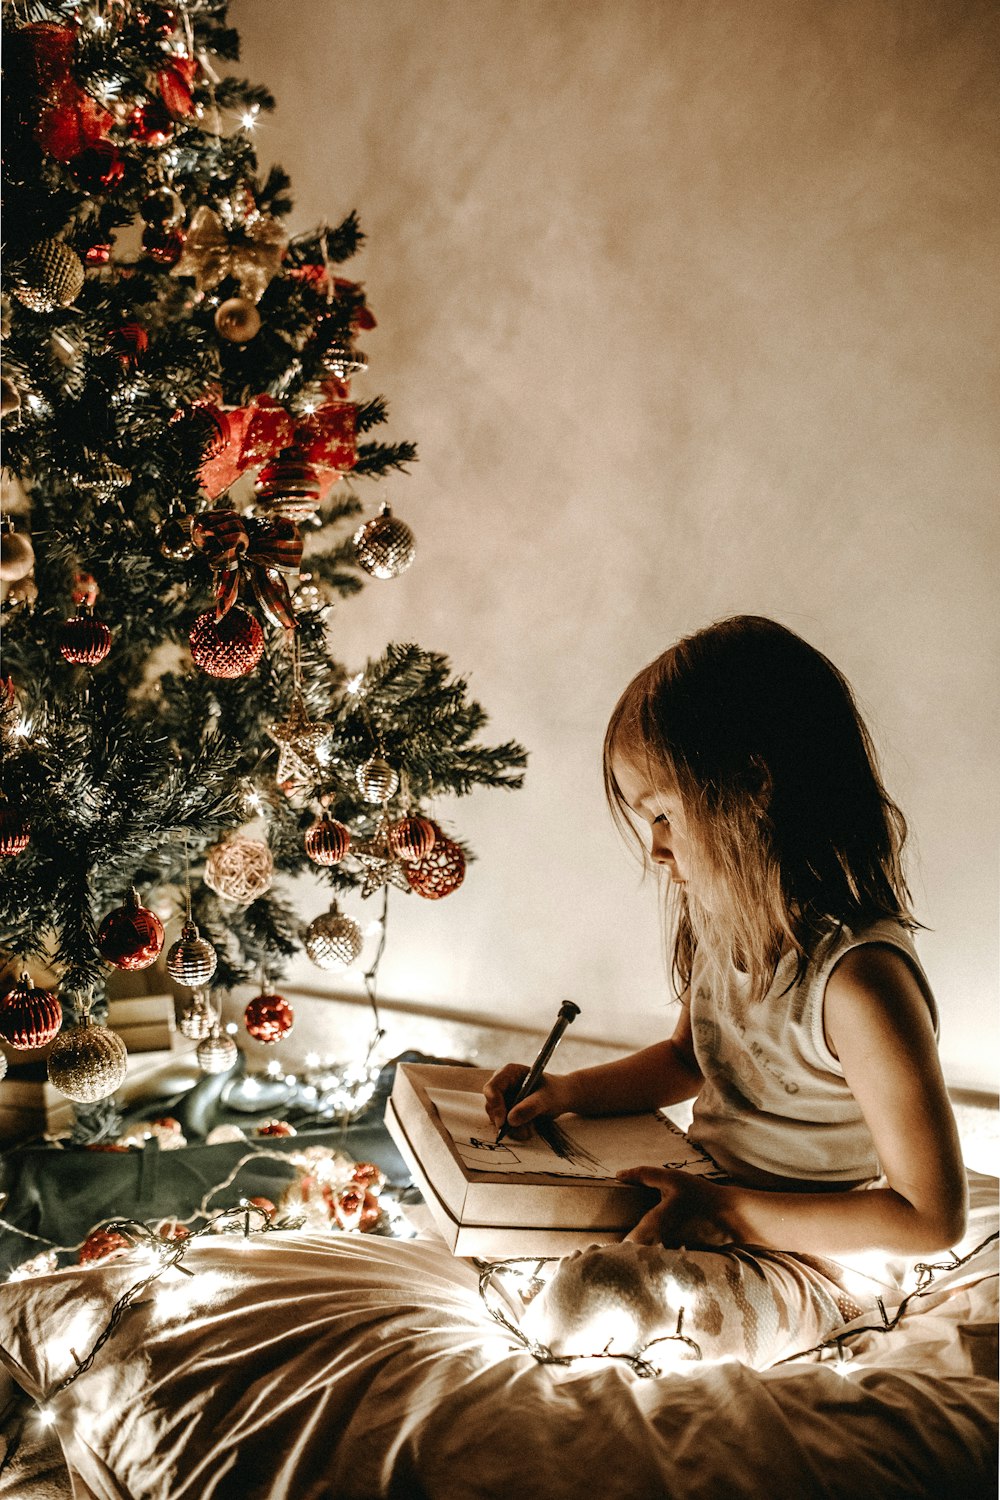 Christmas Pictures 2020 Download Free Images On Unsplash